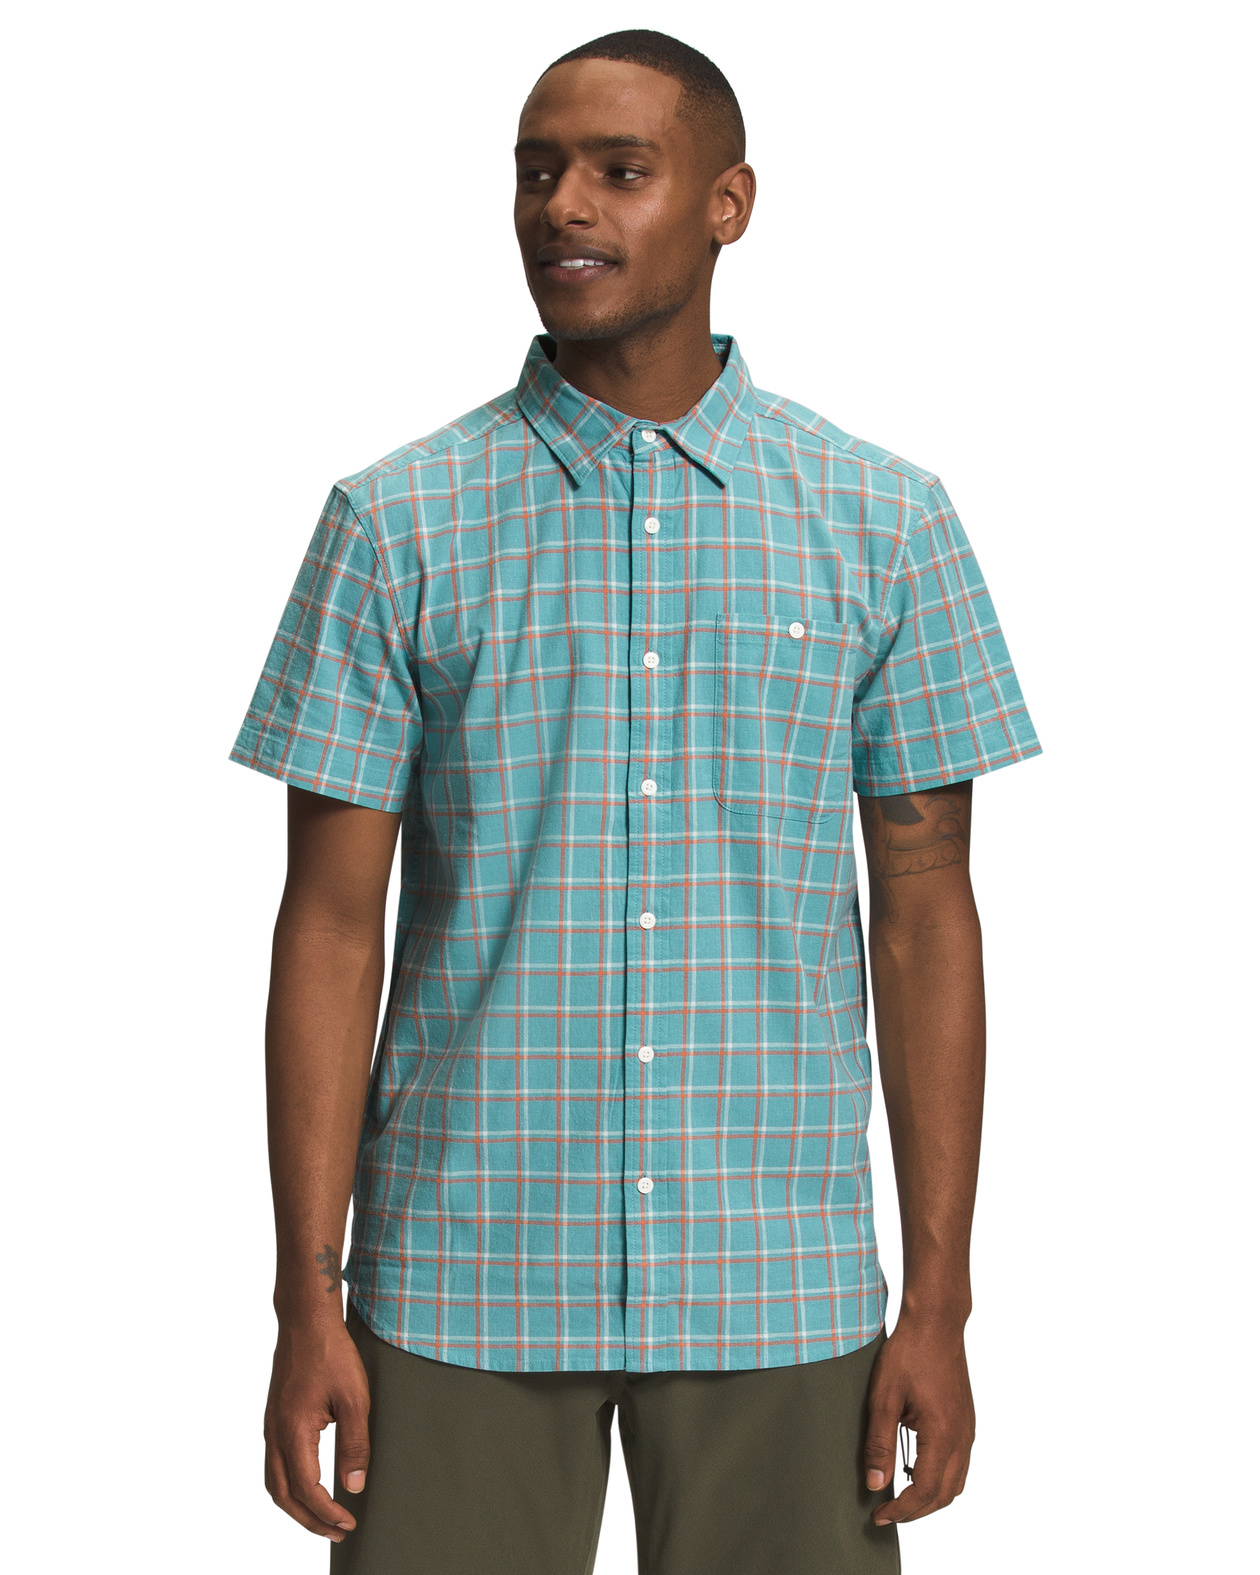 The North Face Loghill Short Sleeve Shirt Men's (Reef Waters TNF Grid Plaid)